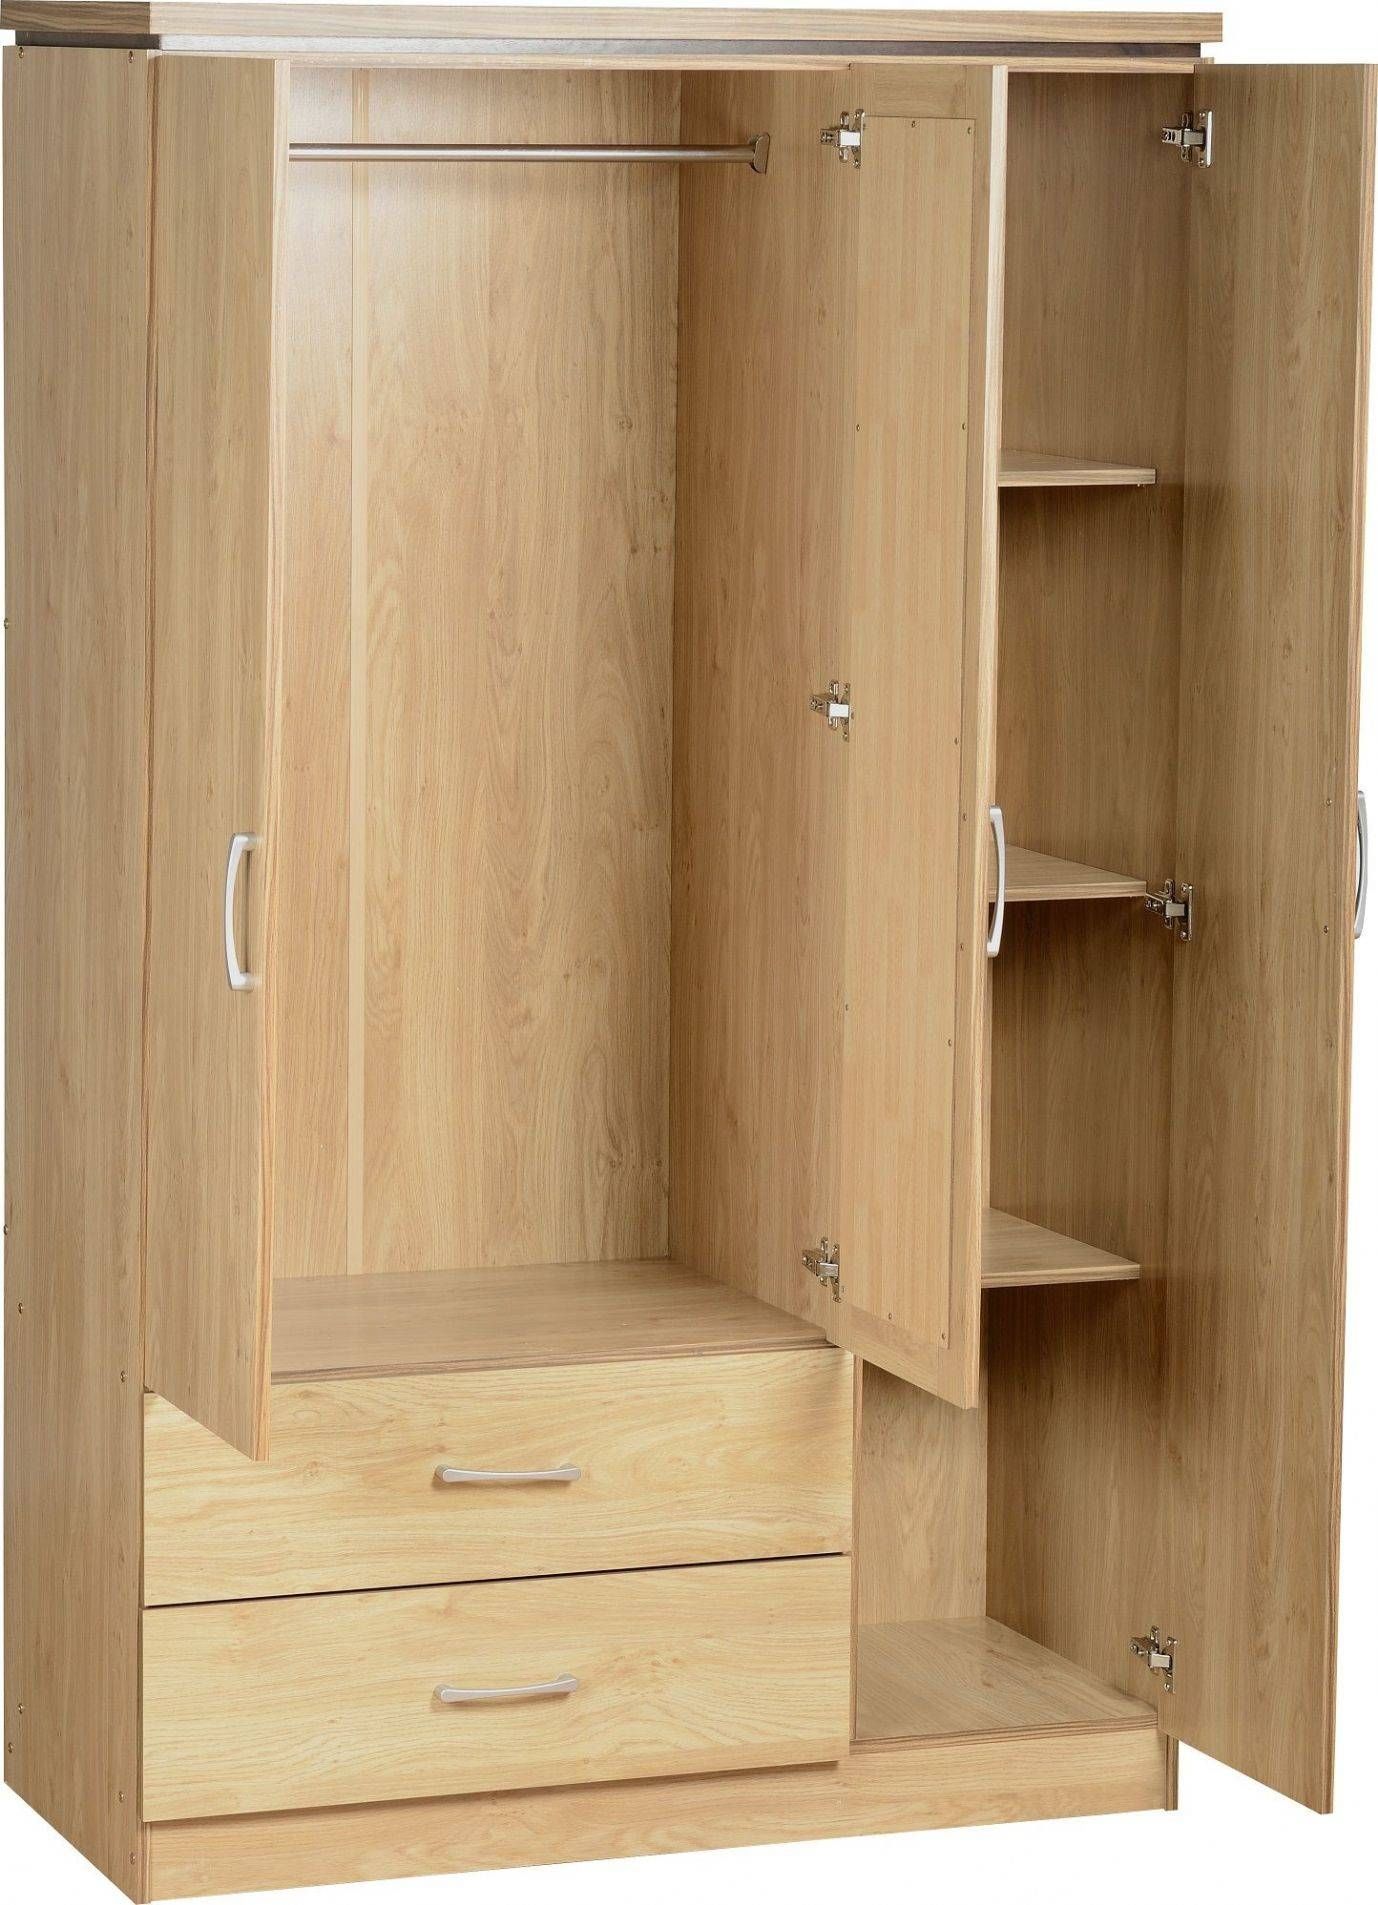 Wardrobes With Shelves, Ca Baumhaus Amelie Oak Childrens Kids Pertaining To Oak Wardrobe With Drawers And Shelves (View 2 of 30)